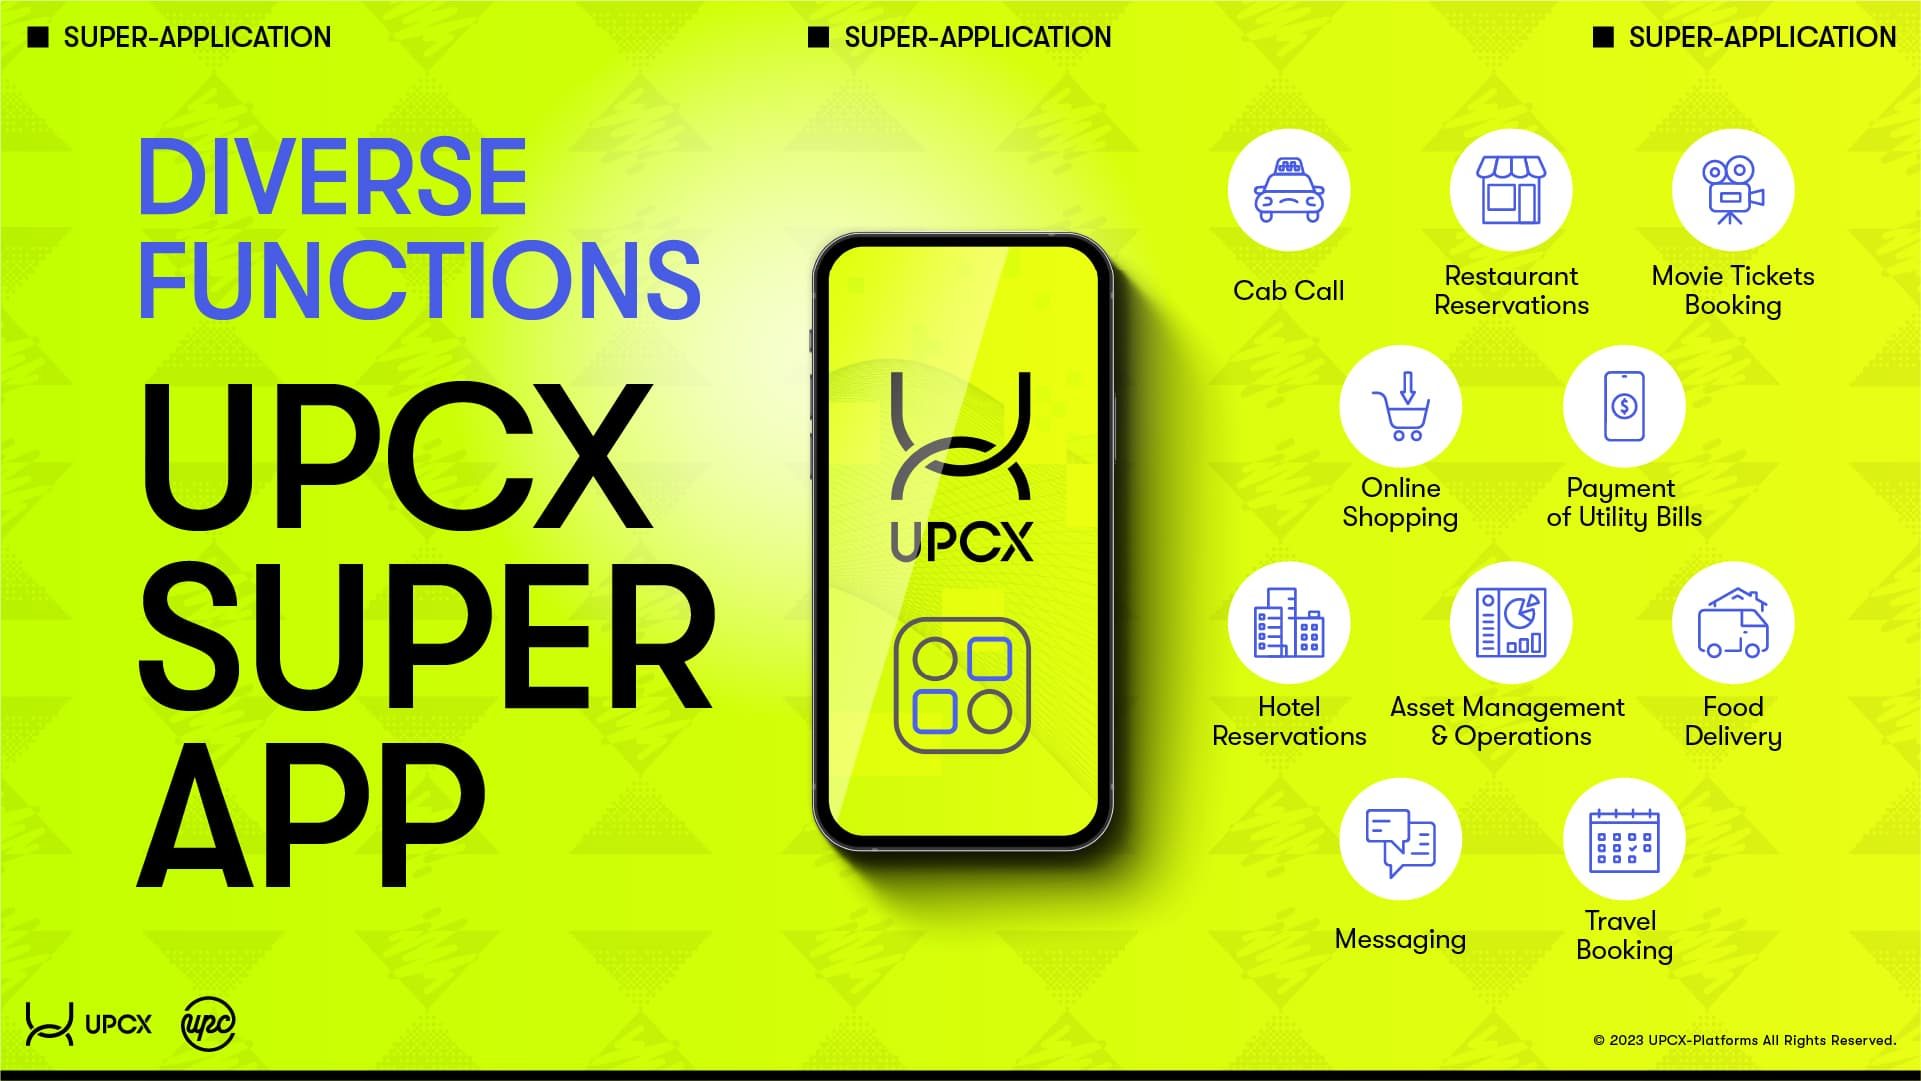 UPCX Token: A Major Investment Choice Following the Approval of Bitcoin ETFs